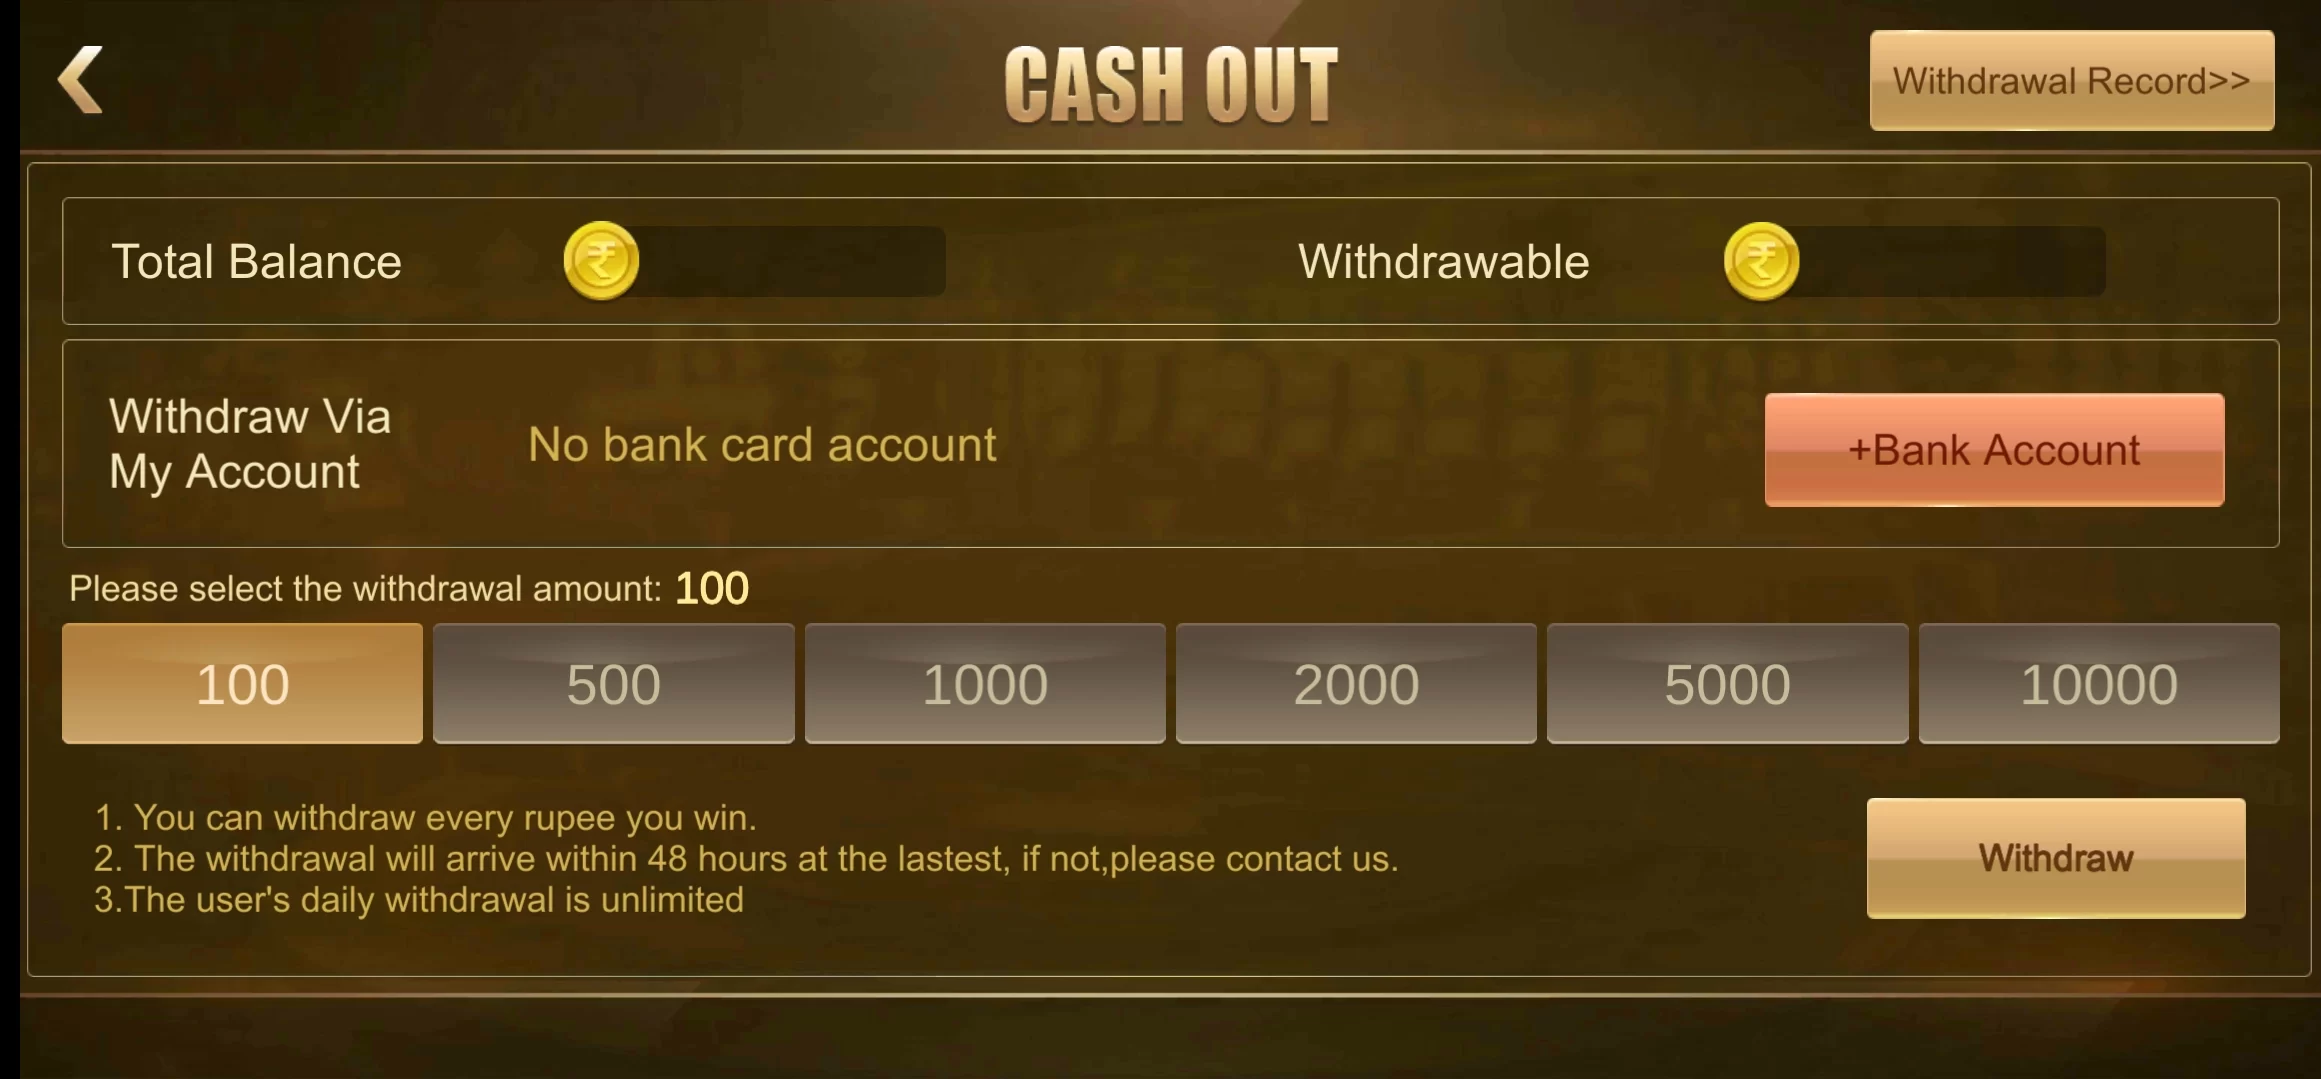 withdrawal process of the Wisdom Slots application